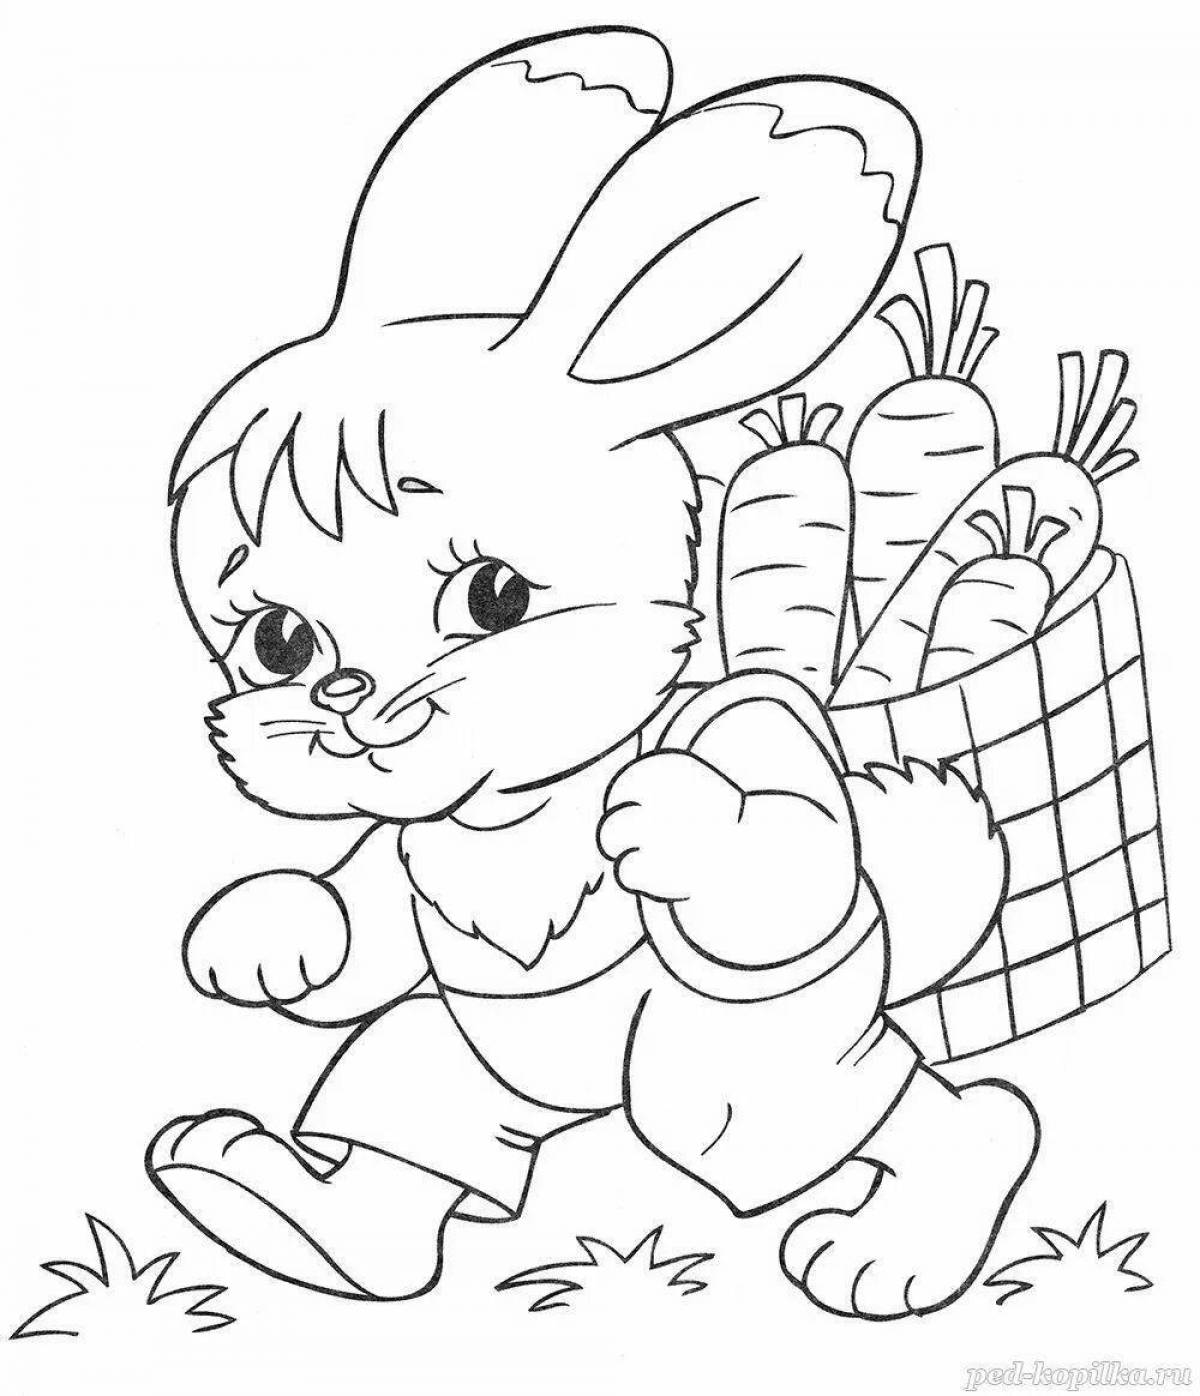 Bright coloring bunny new year